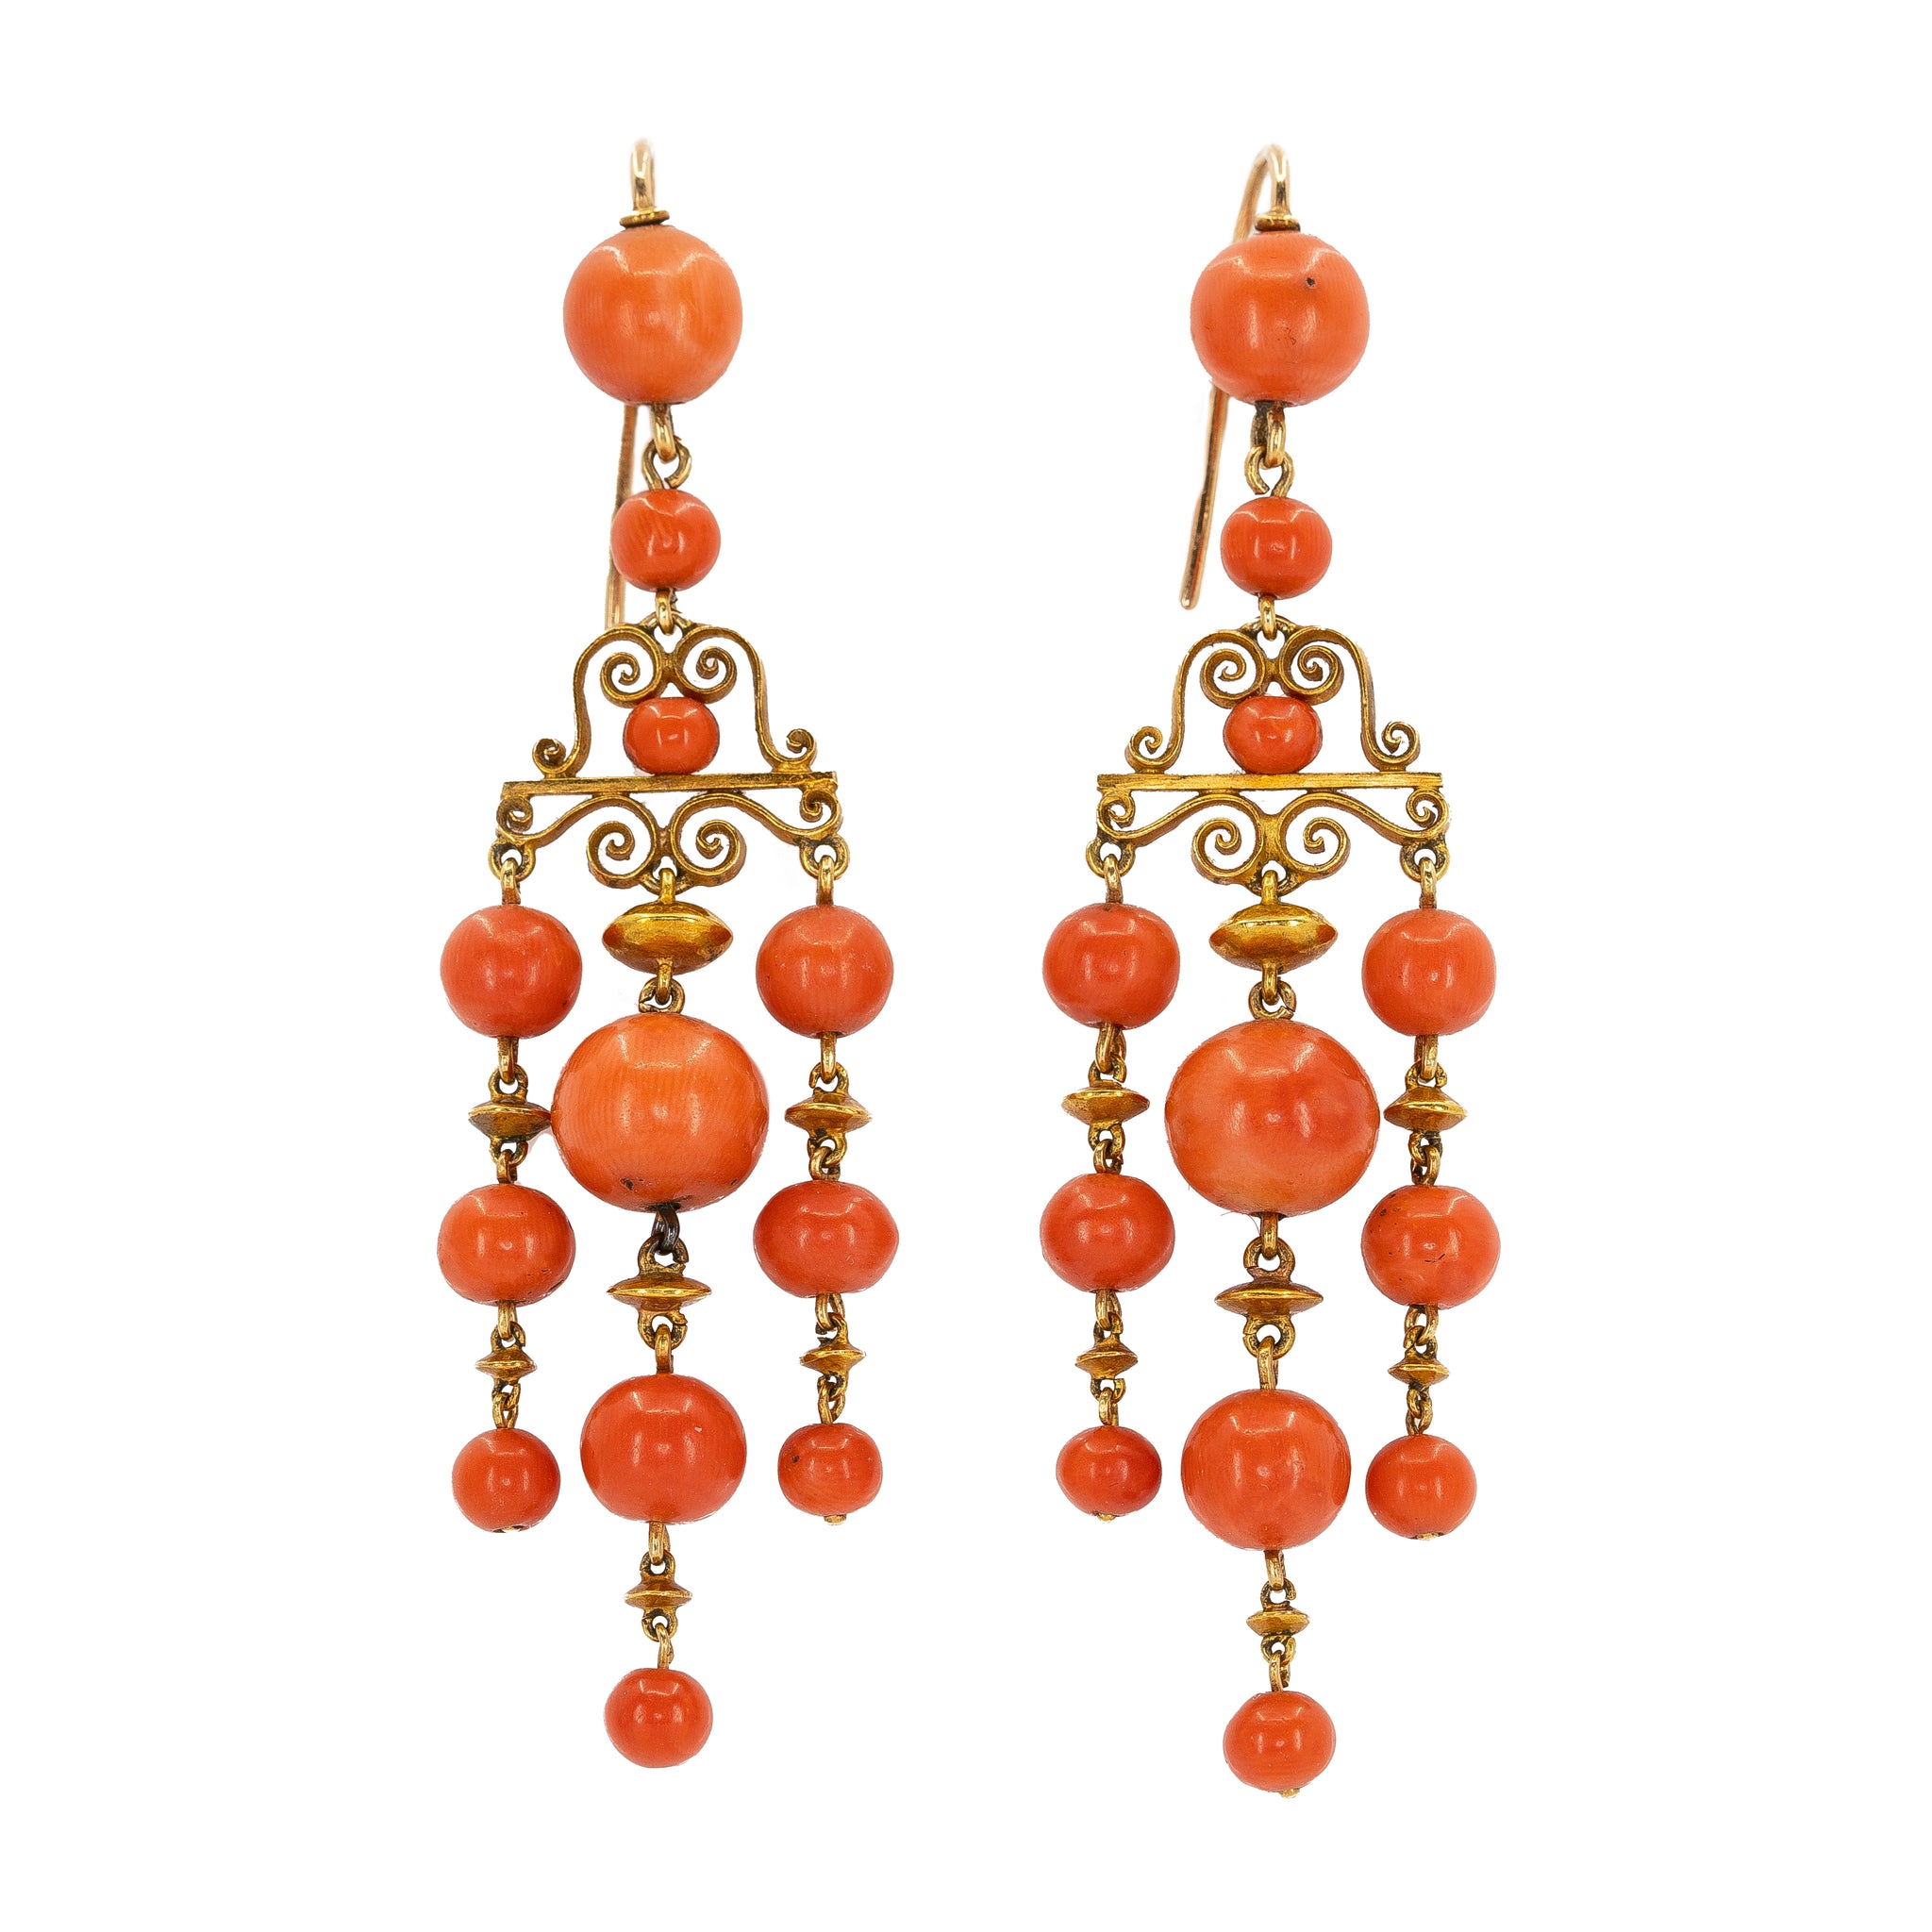 Nineteenth Century French Coral and Gold Earrings